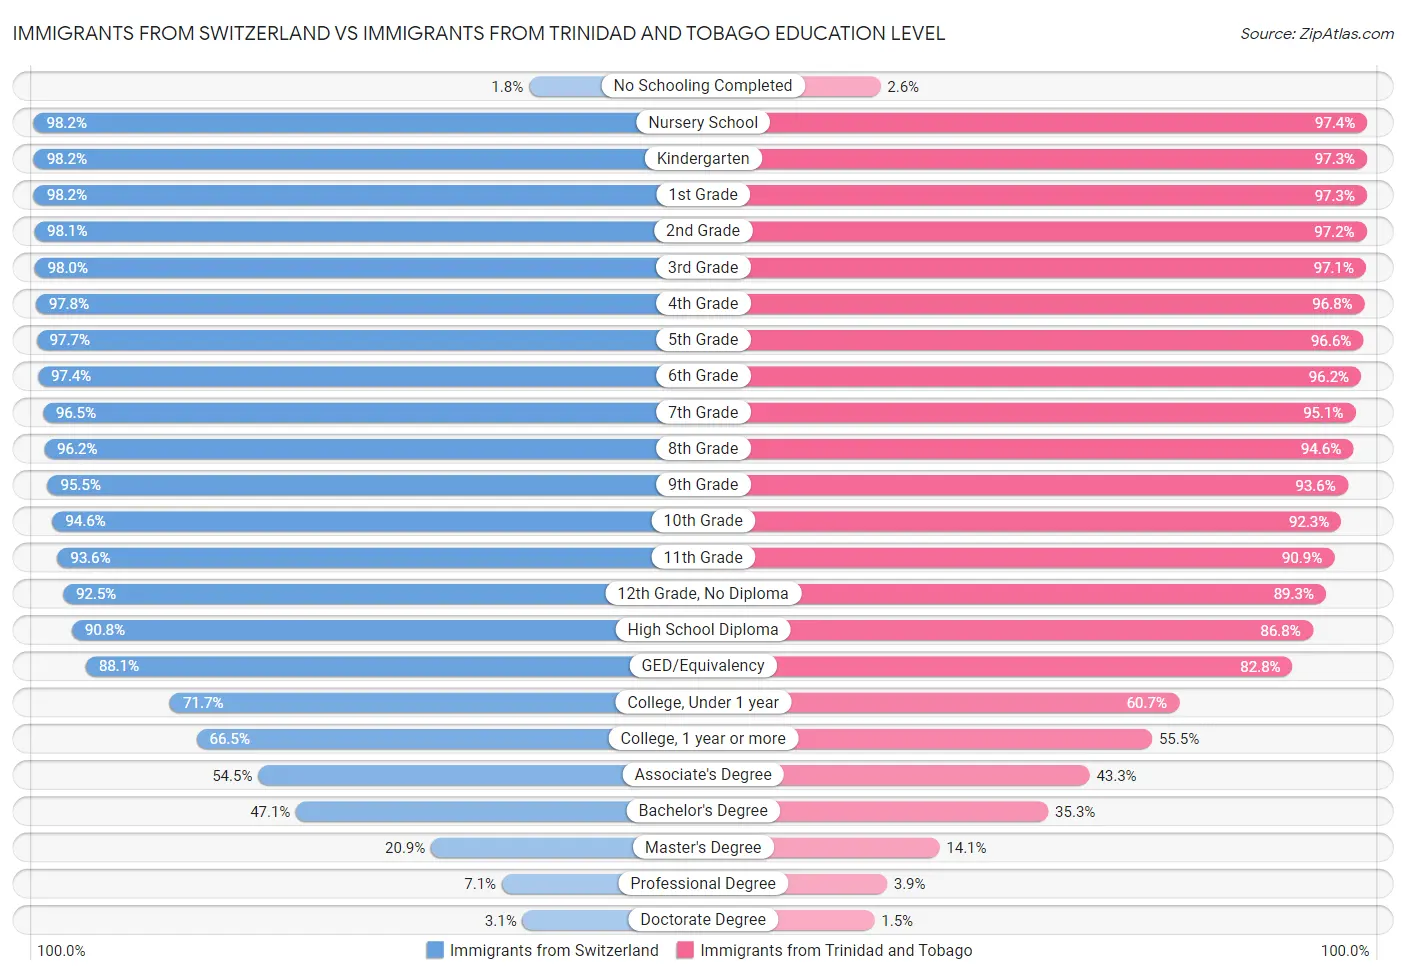 Immigrants from Switzerland vs Immigrants from Trinidad and Tobago Education Level